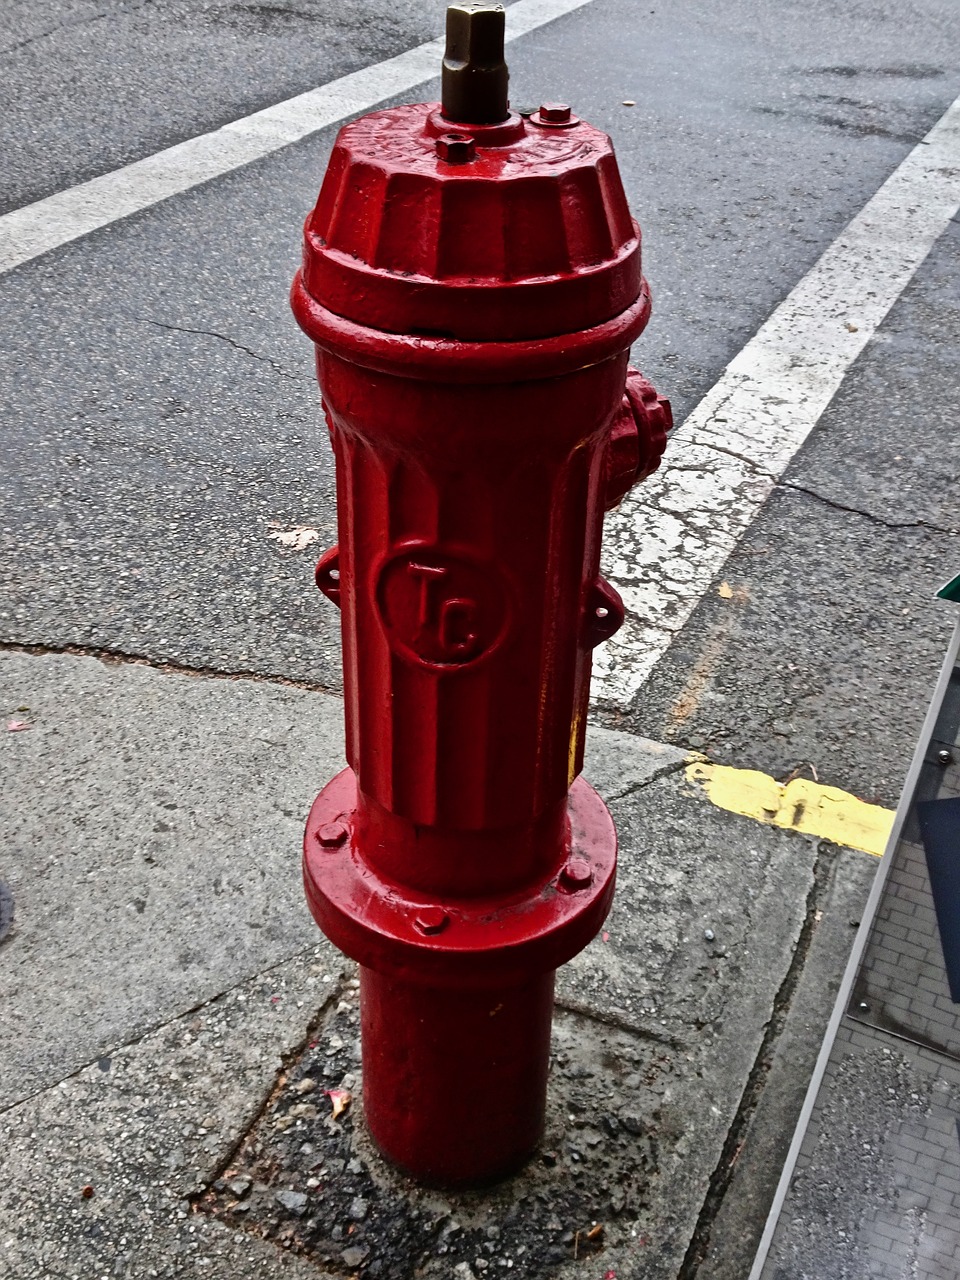 fire hydrant red water free photo